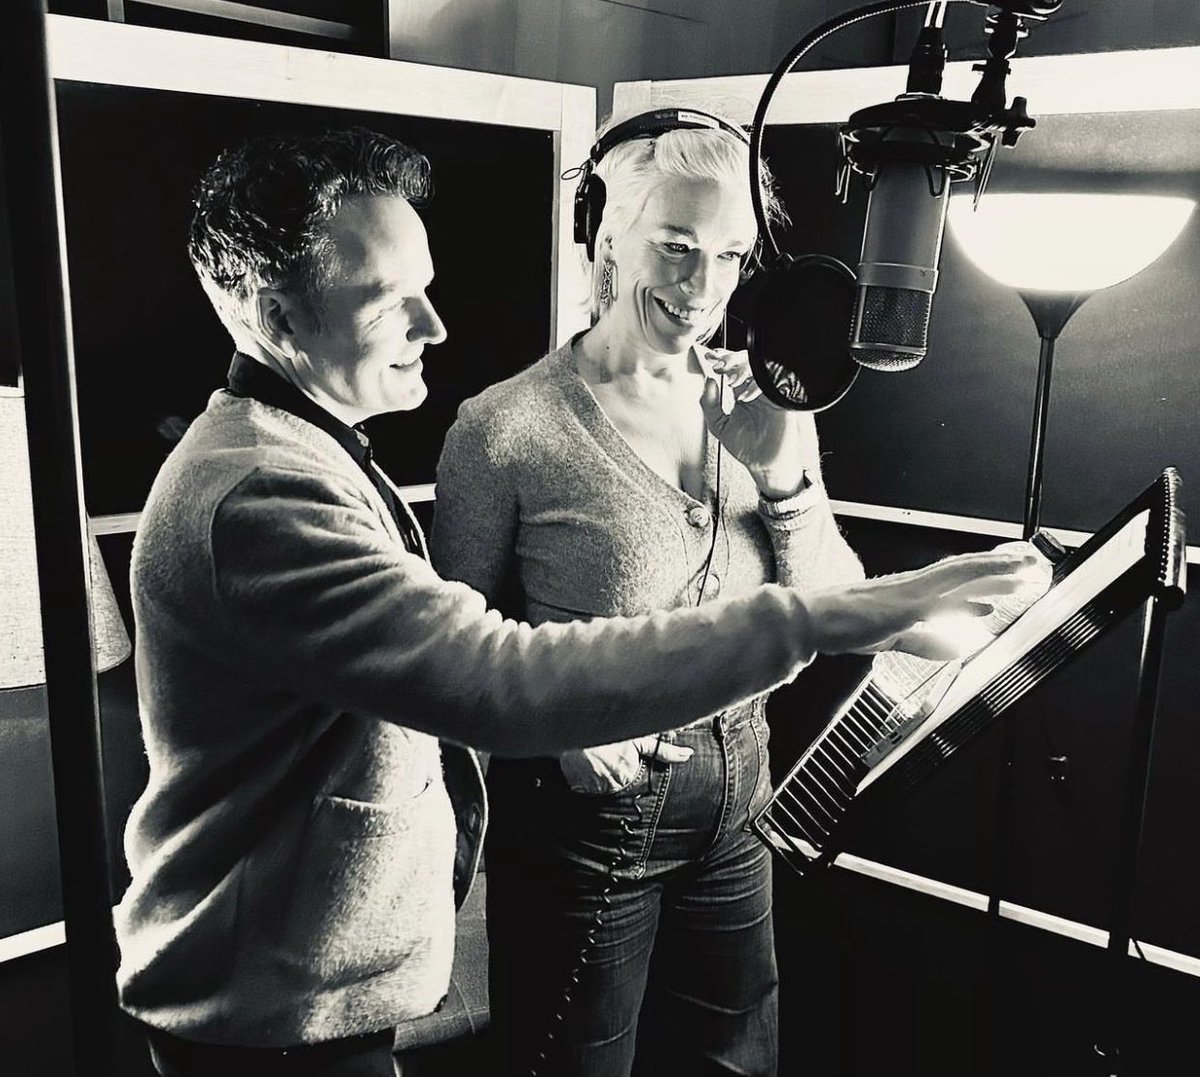 📸: “Glorious to work with superstar Hannah Waddingham yesterday on a rather exciting thing. She was on amazing form - THAT VOICE! Thank you @MetropStudios for having us. All revealed soon” - @joestilgoe via IG